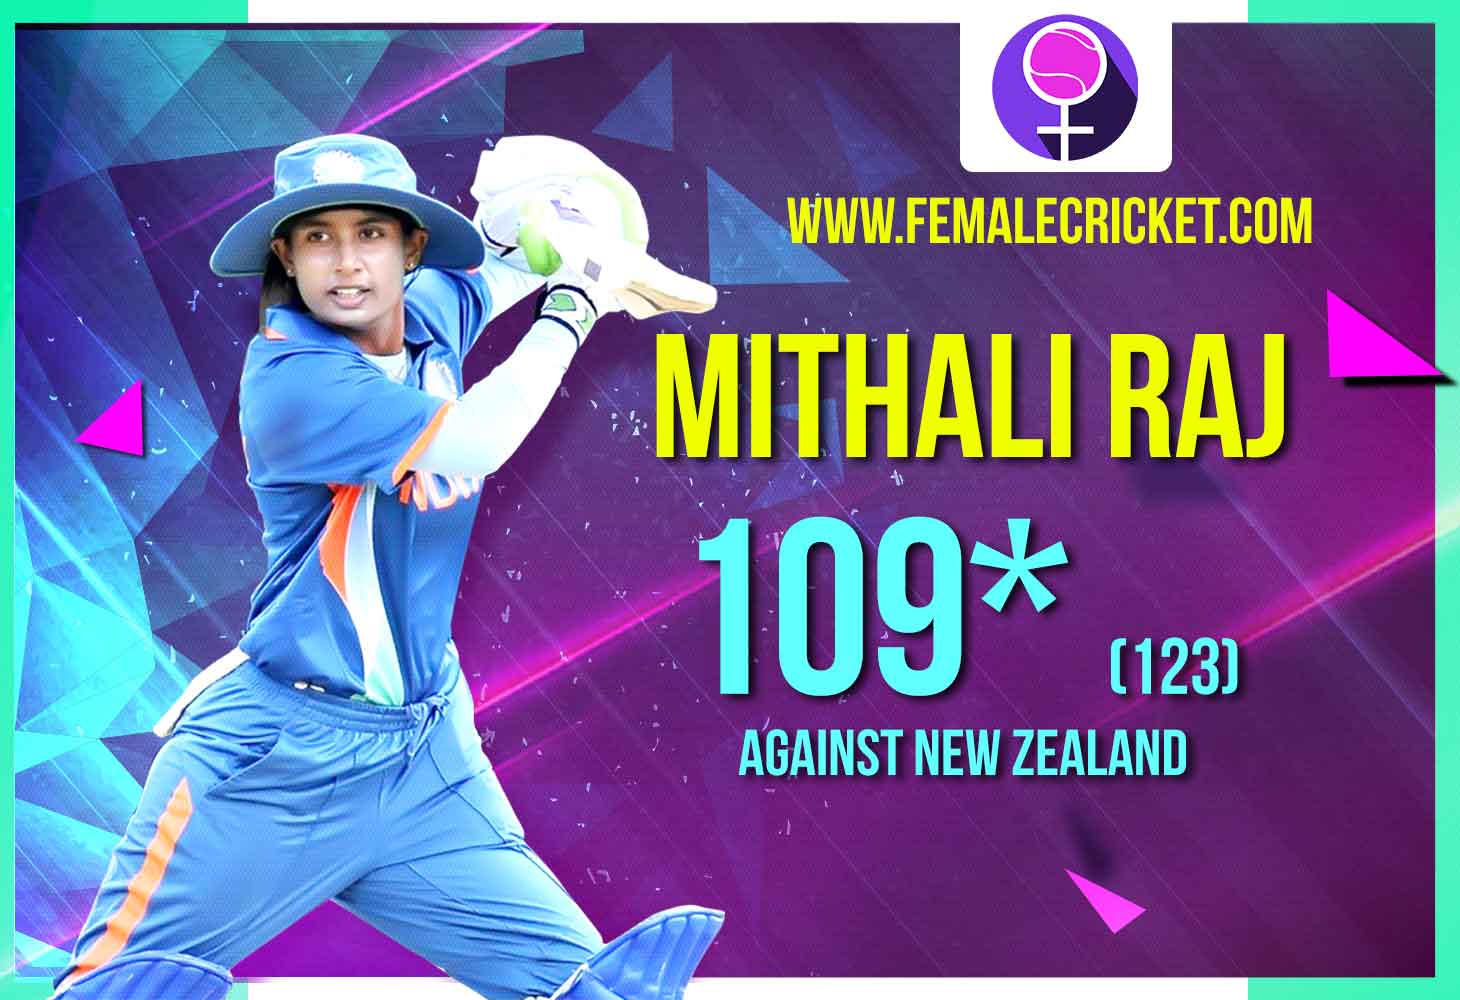 Mithali guides India with 109 runs against New Zealand in World Cup 2017